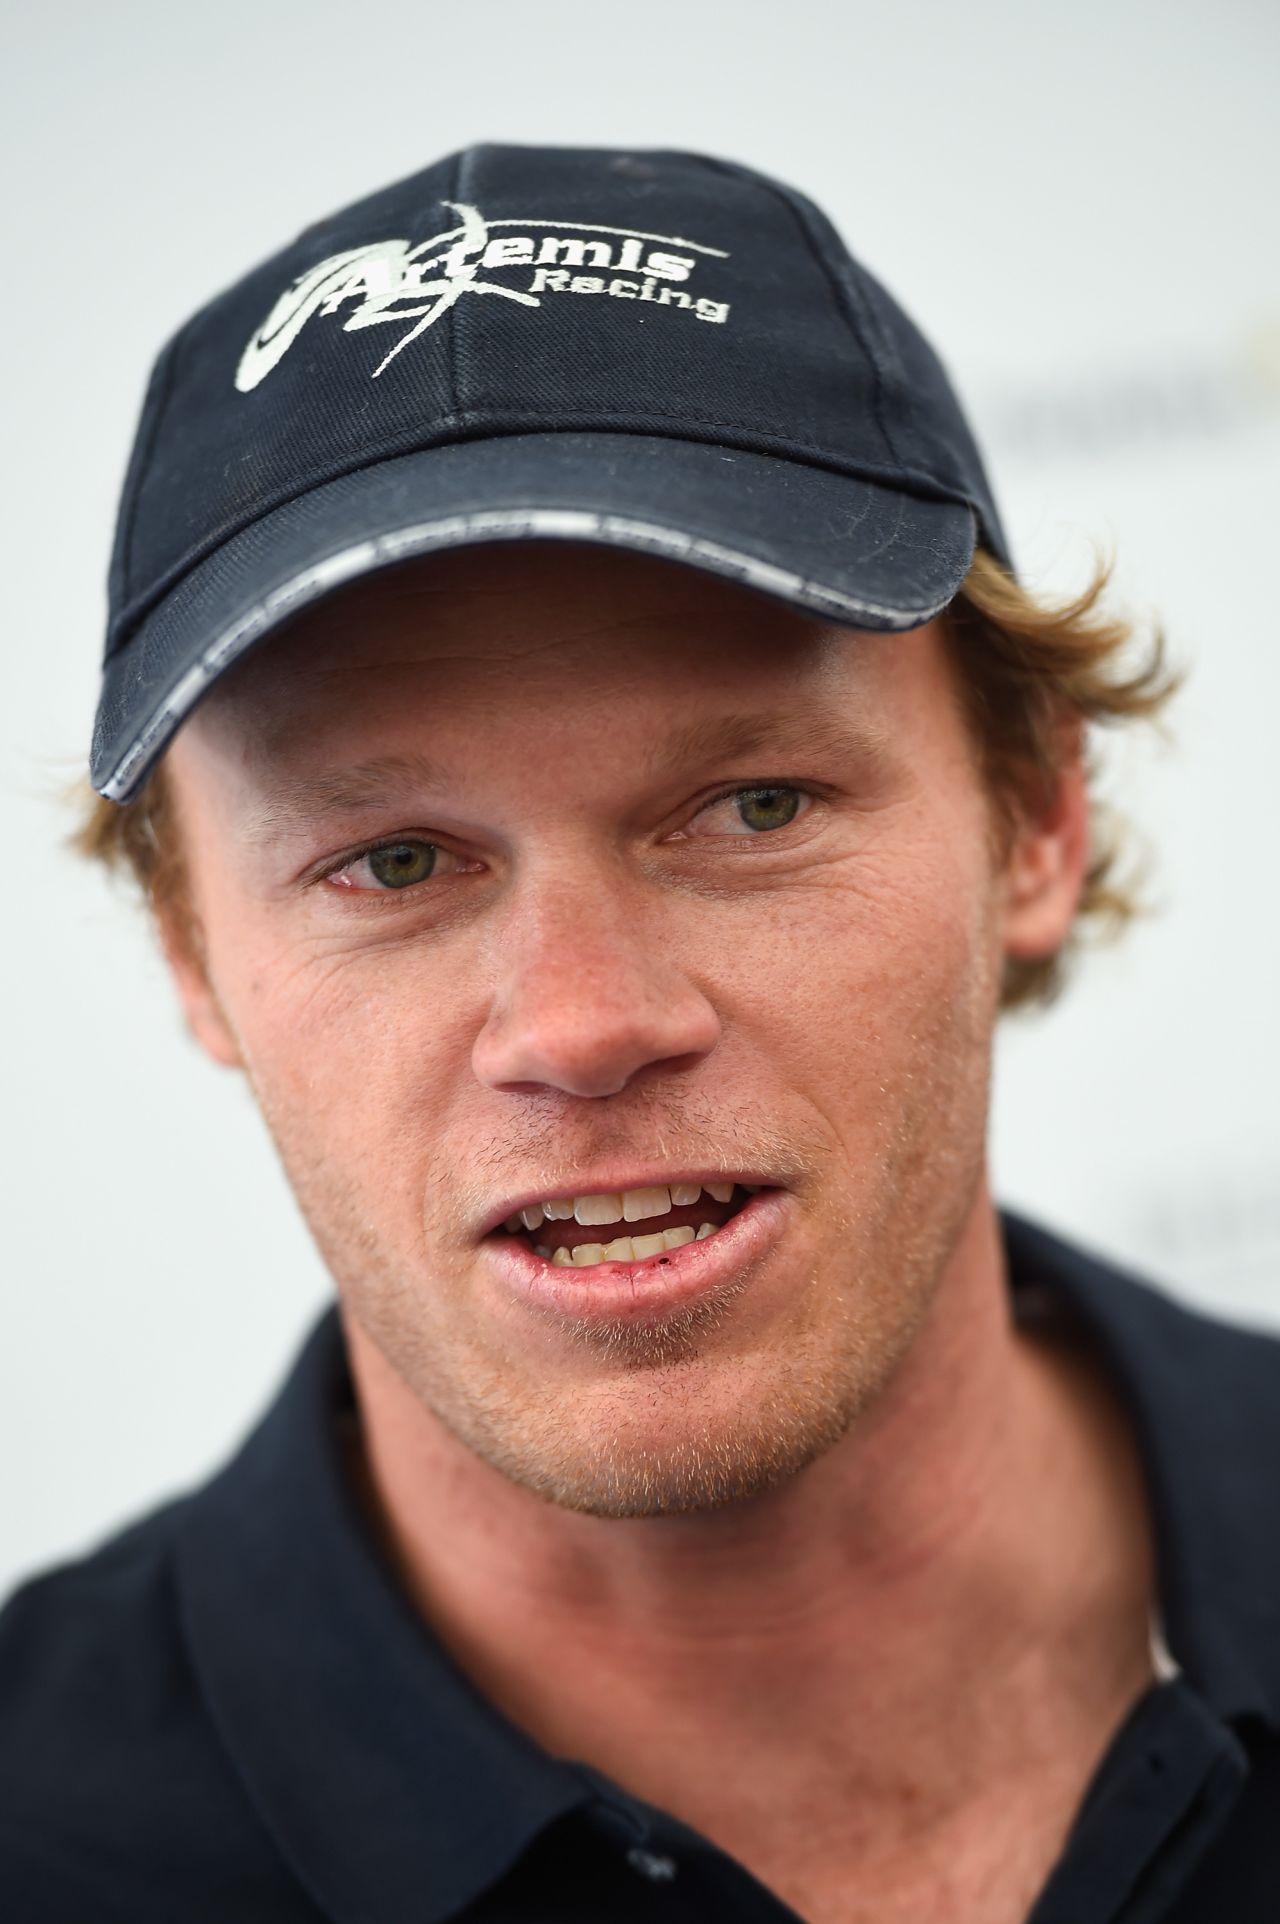 Its Australian skipper Nathan Outteridge (pictured) was a gold medalist at London 2012, while team manager/tactician Iain Percy is a two-time Olympic champion for Britain who made his America's Cup debut in 2005.